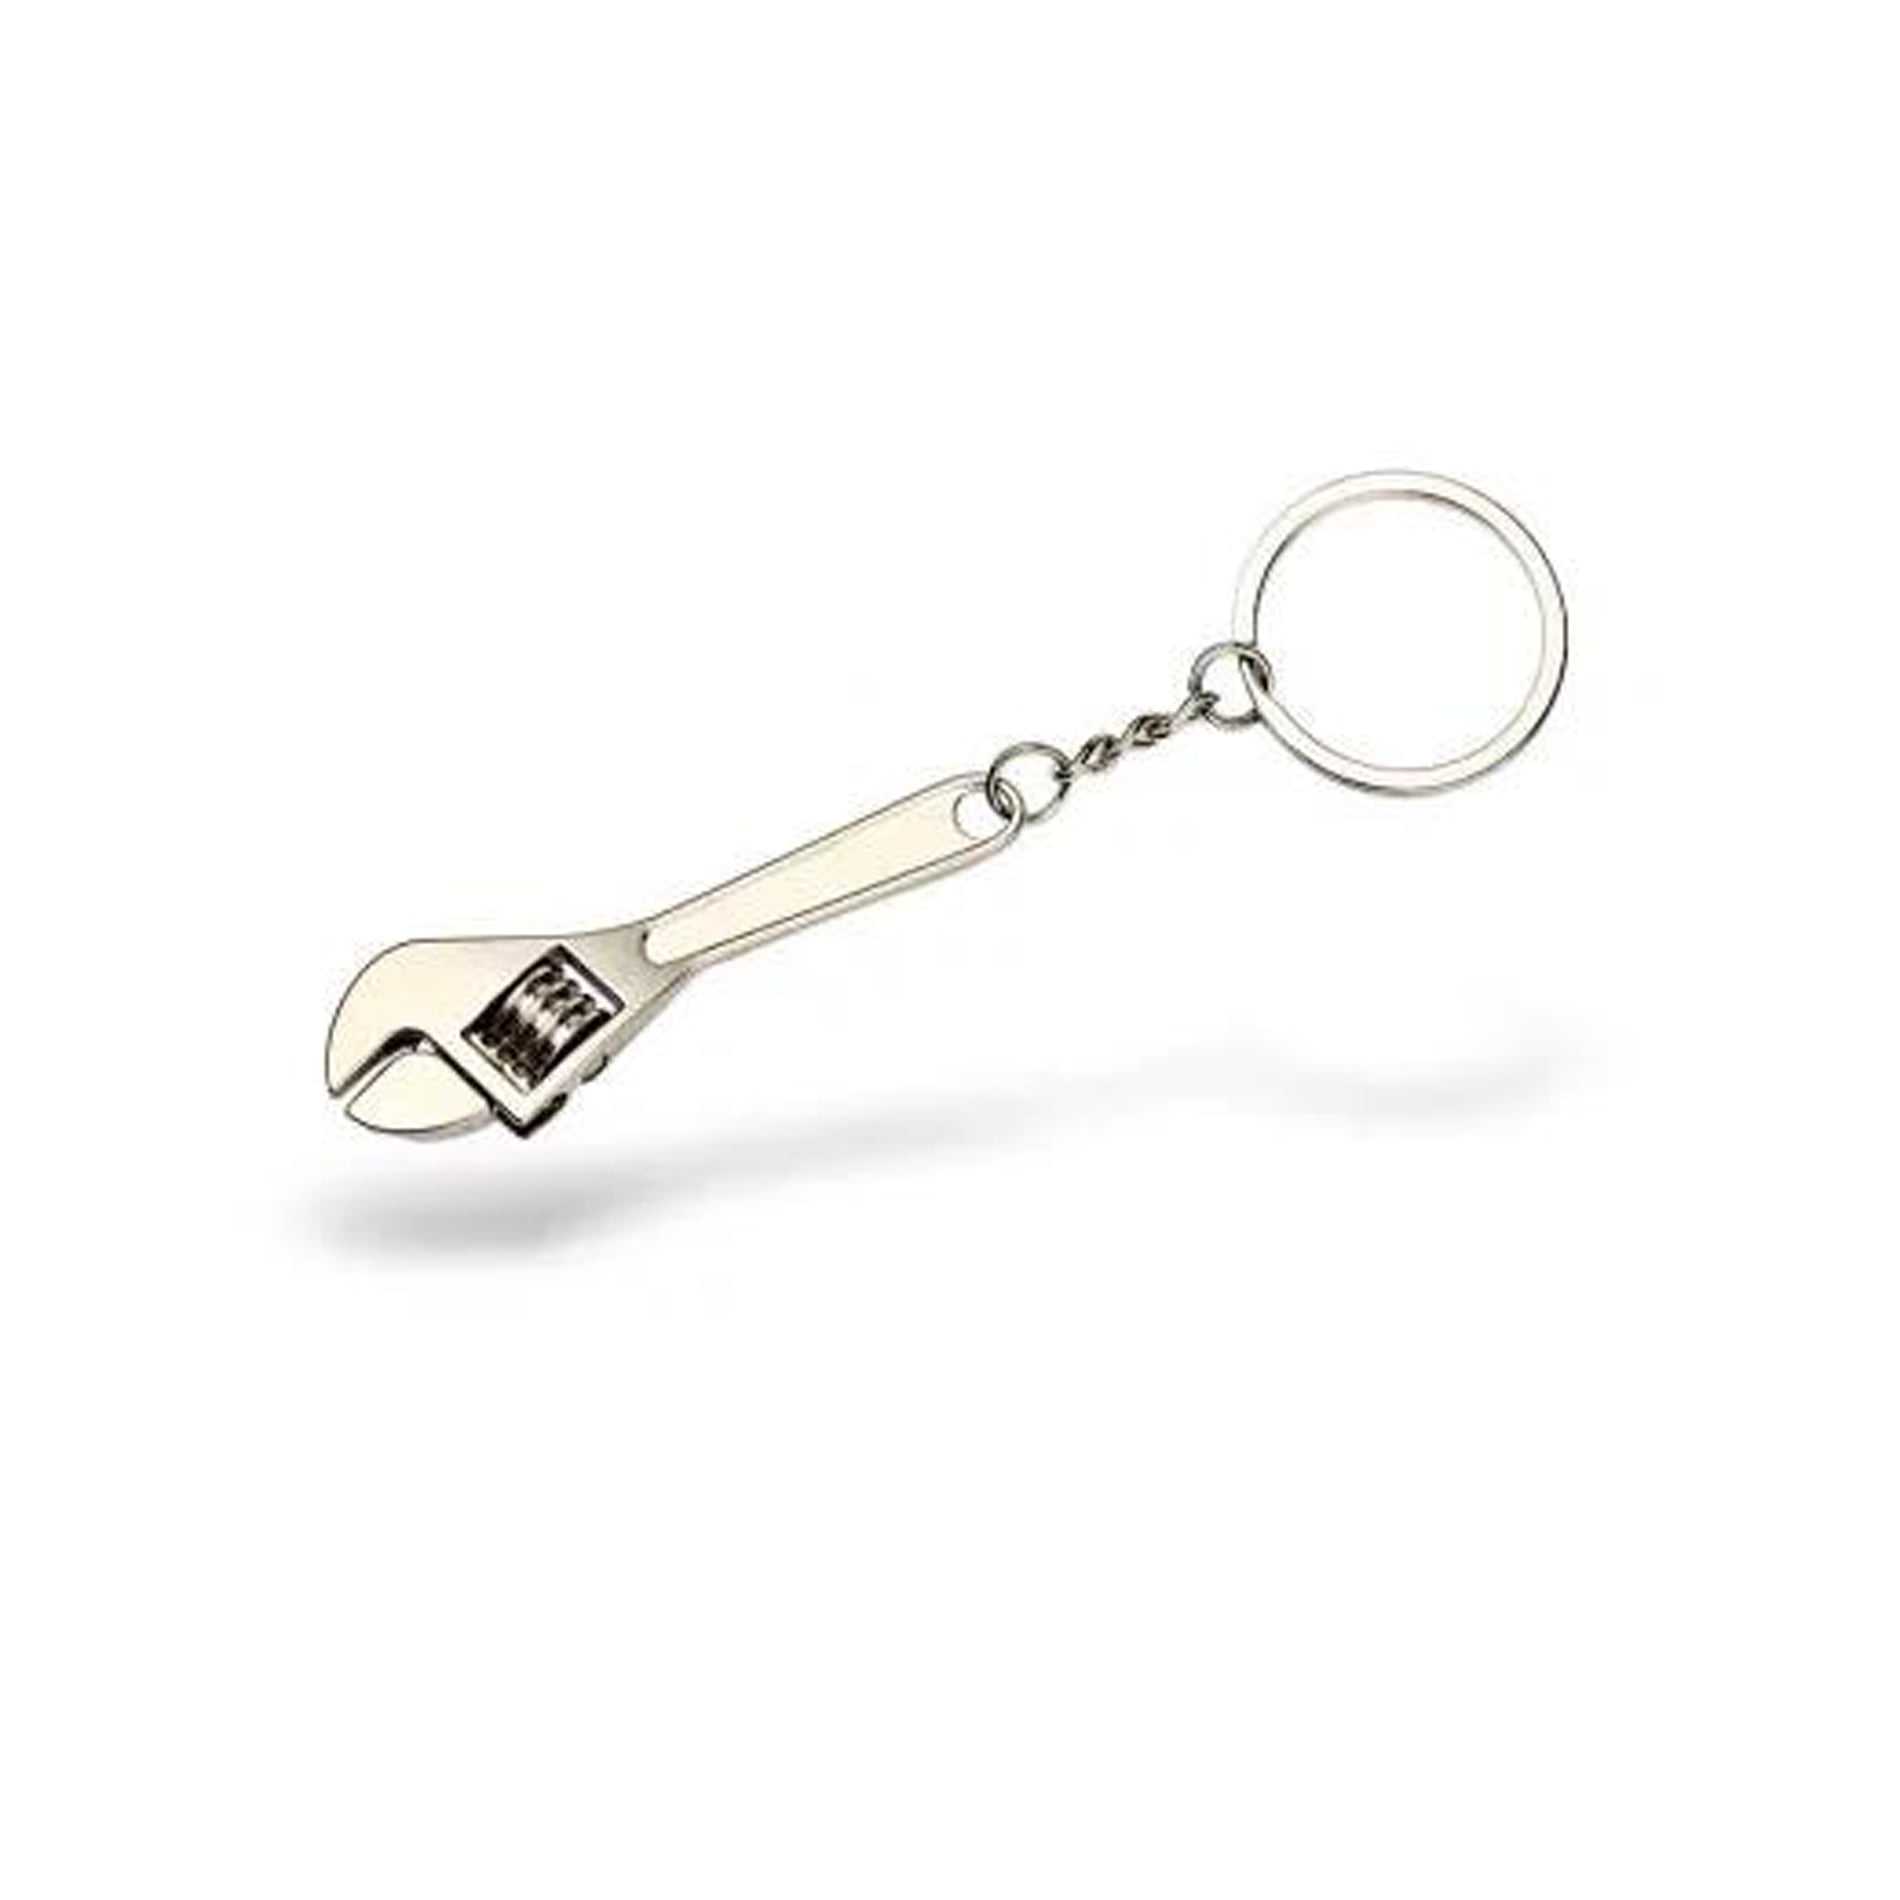 1PC Metal Adjustable Creative Tool Wrench Spanner Key Chain Ring Keyring US 